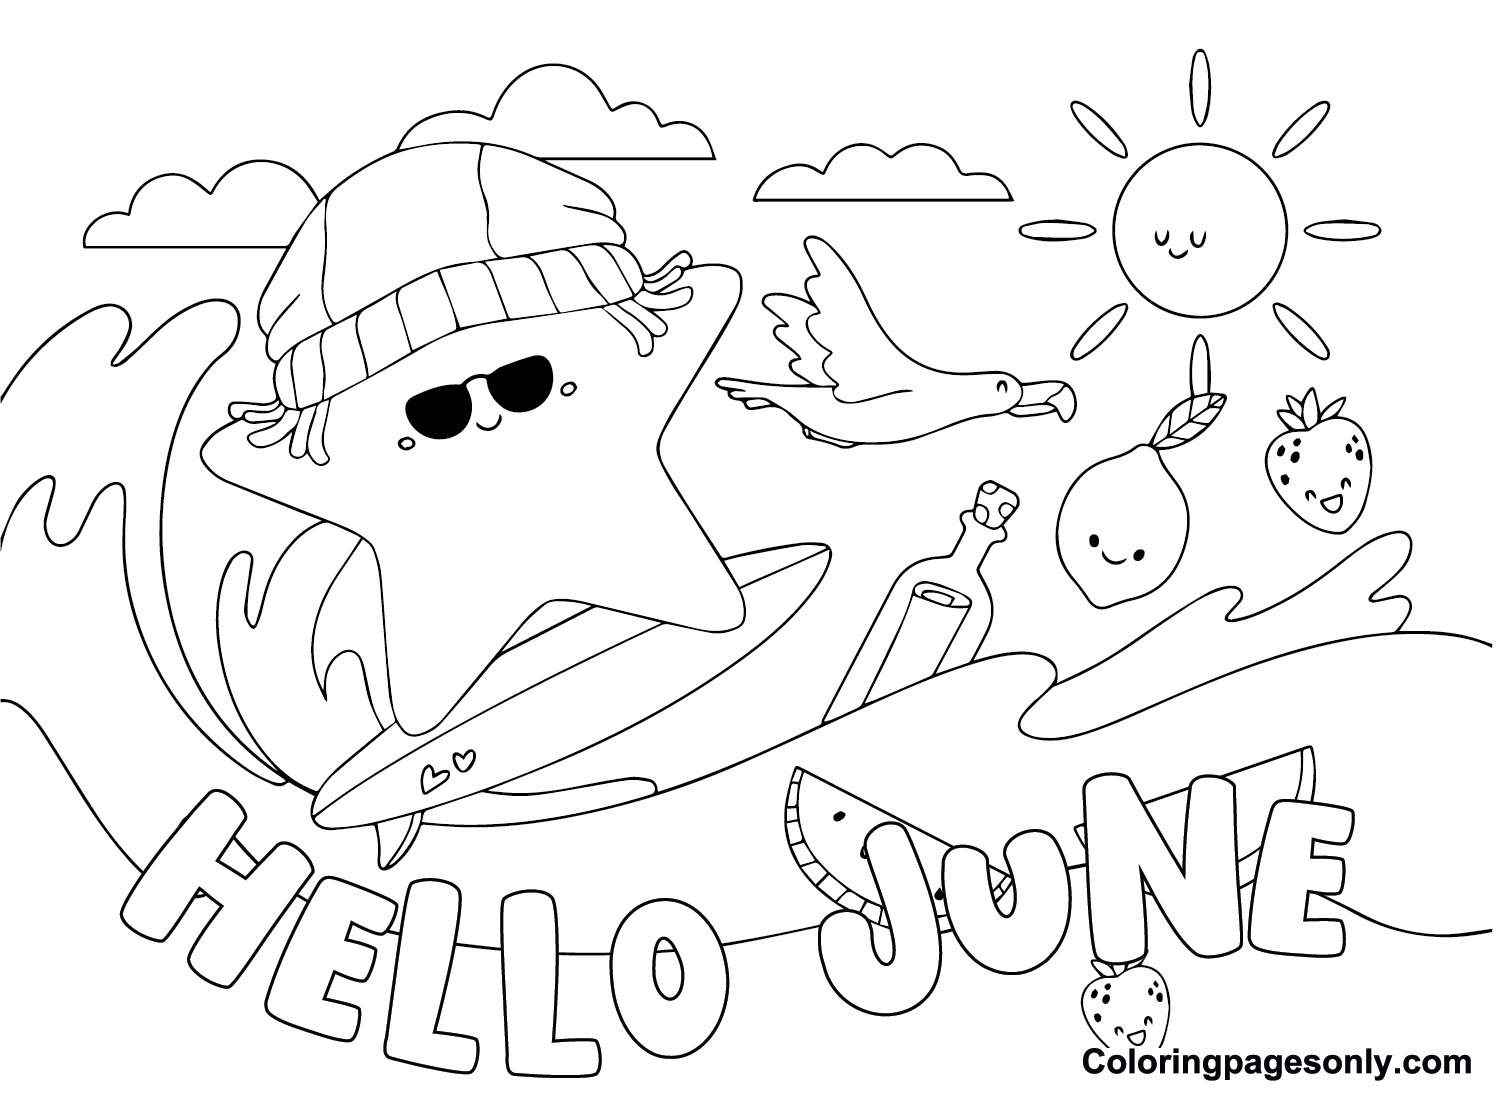 June Coloring Pages - Free Printable Coloring Pages